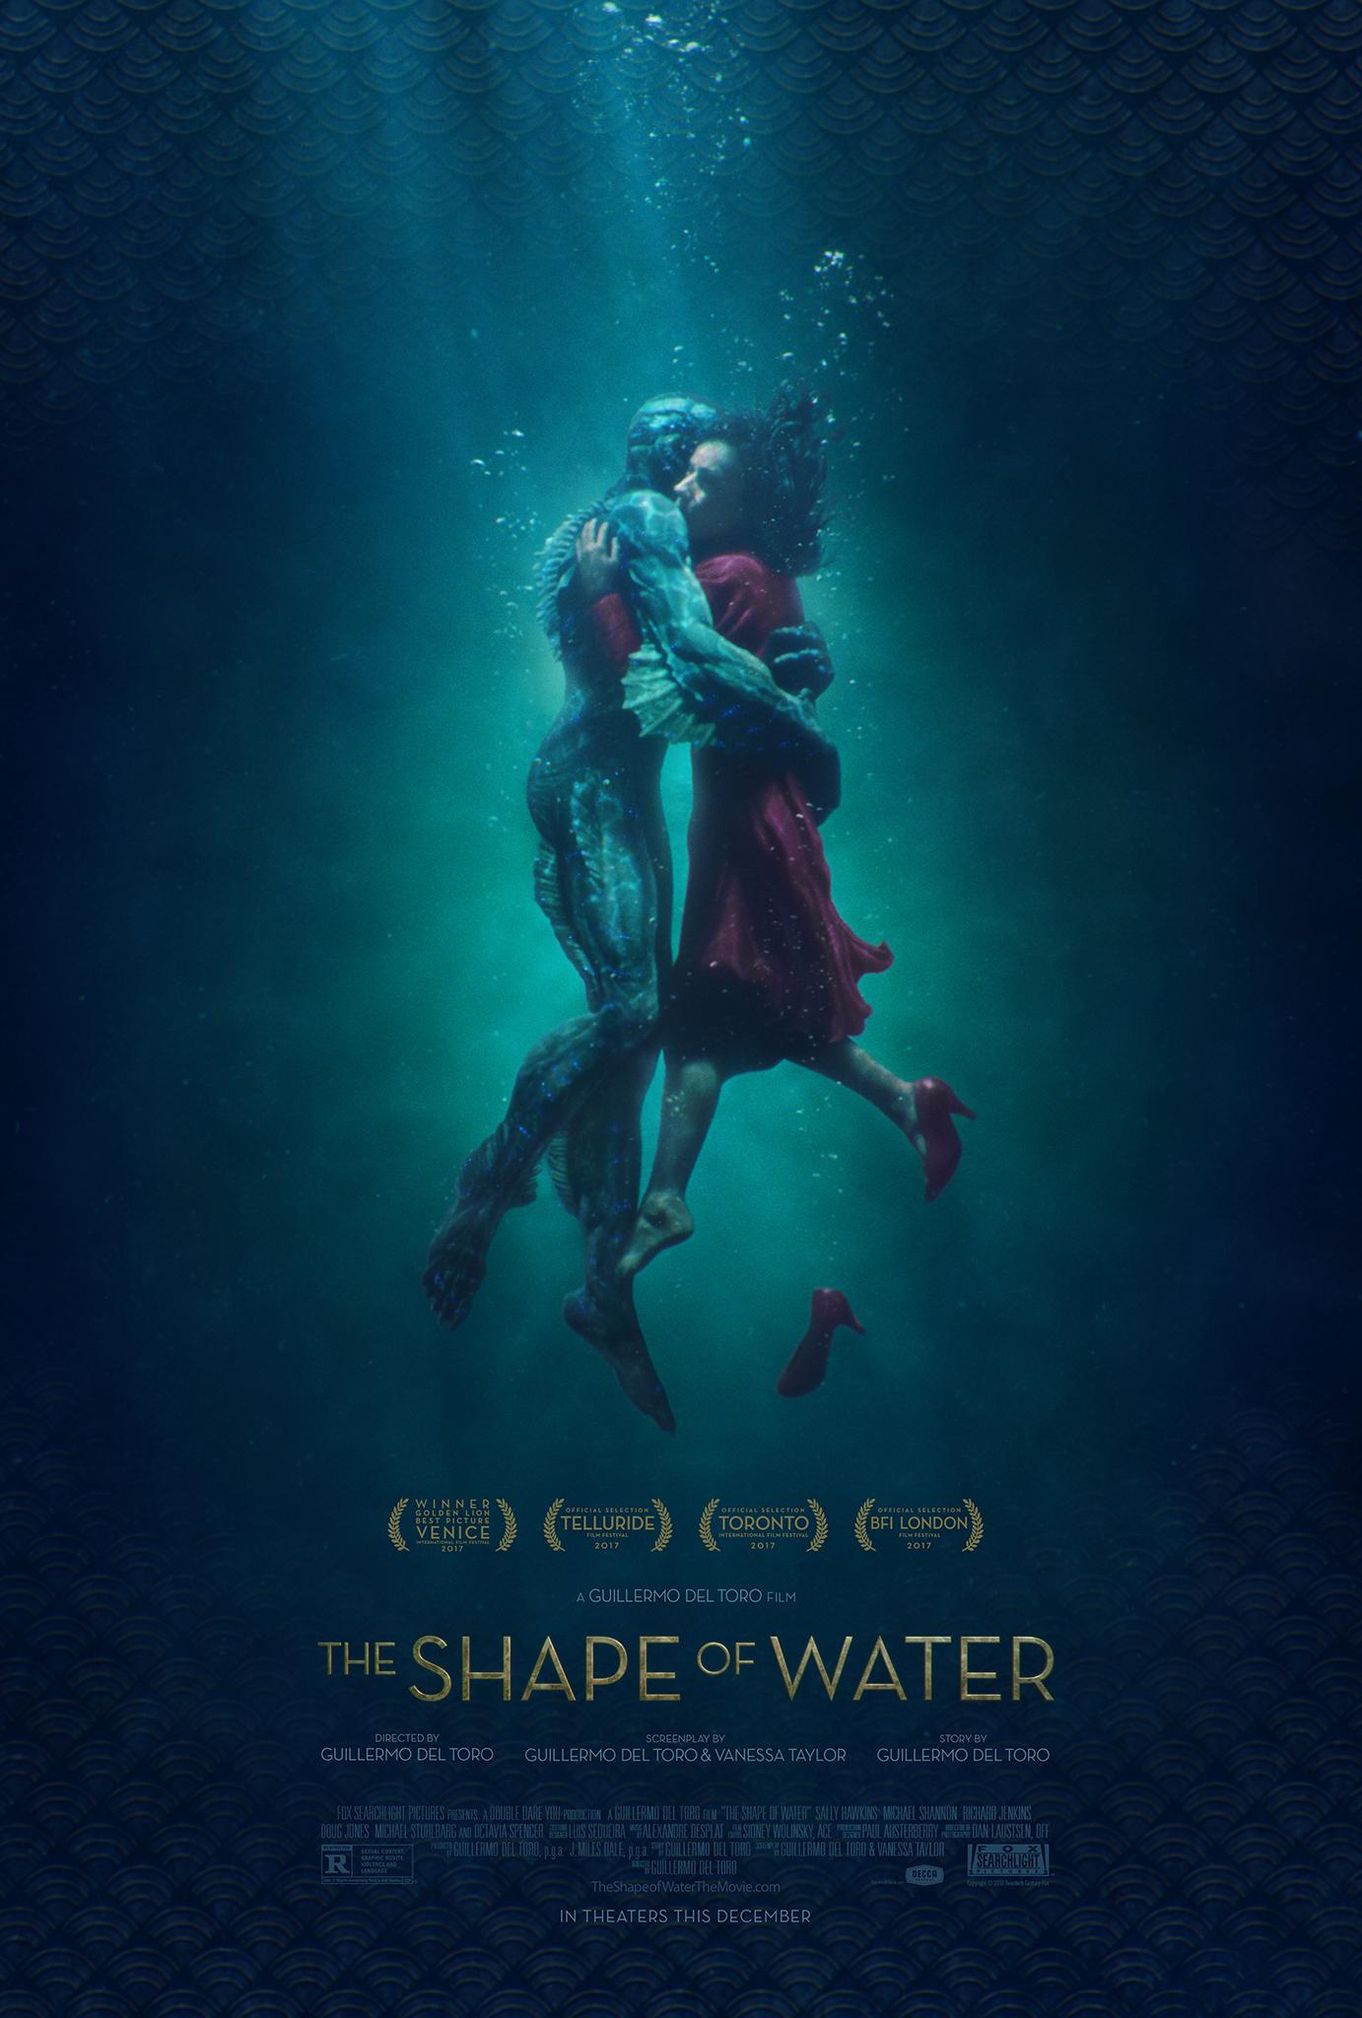 THE SHAPE OF WATER (15)